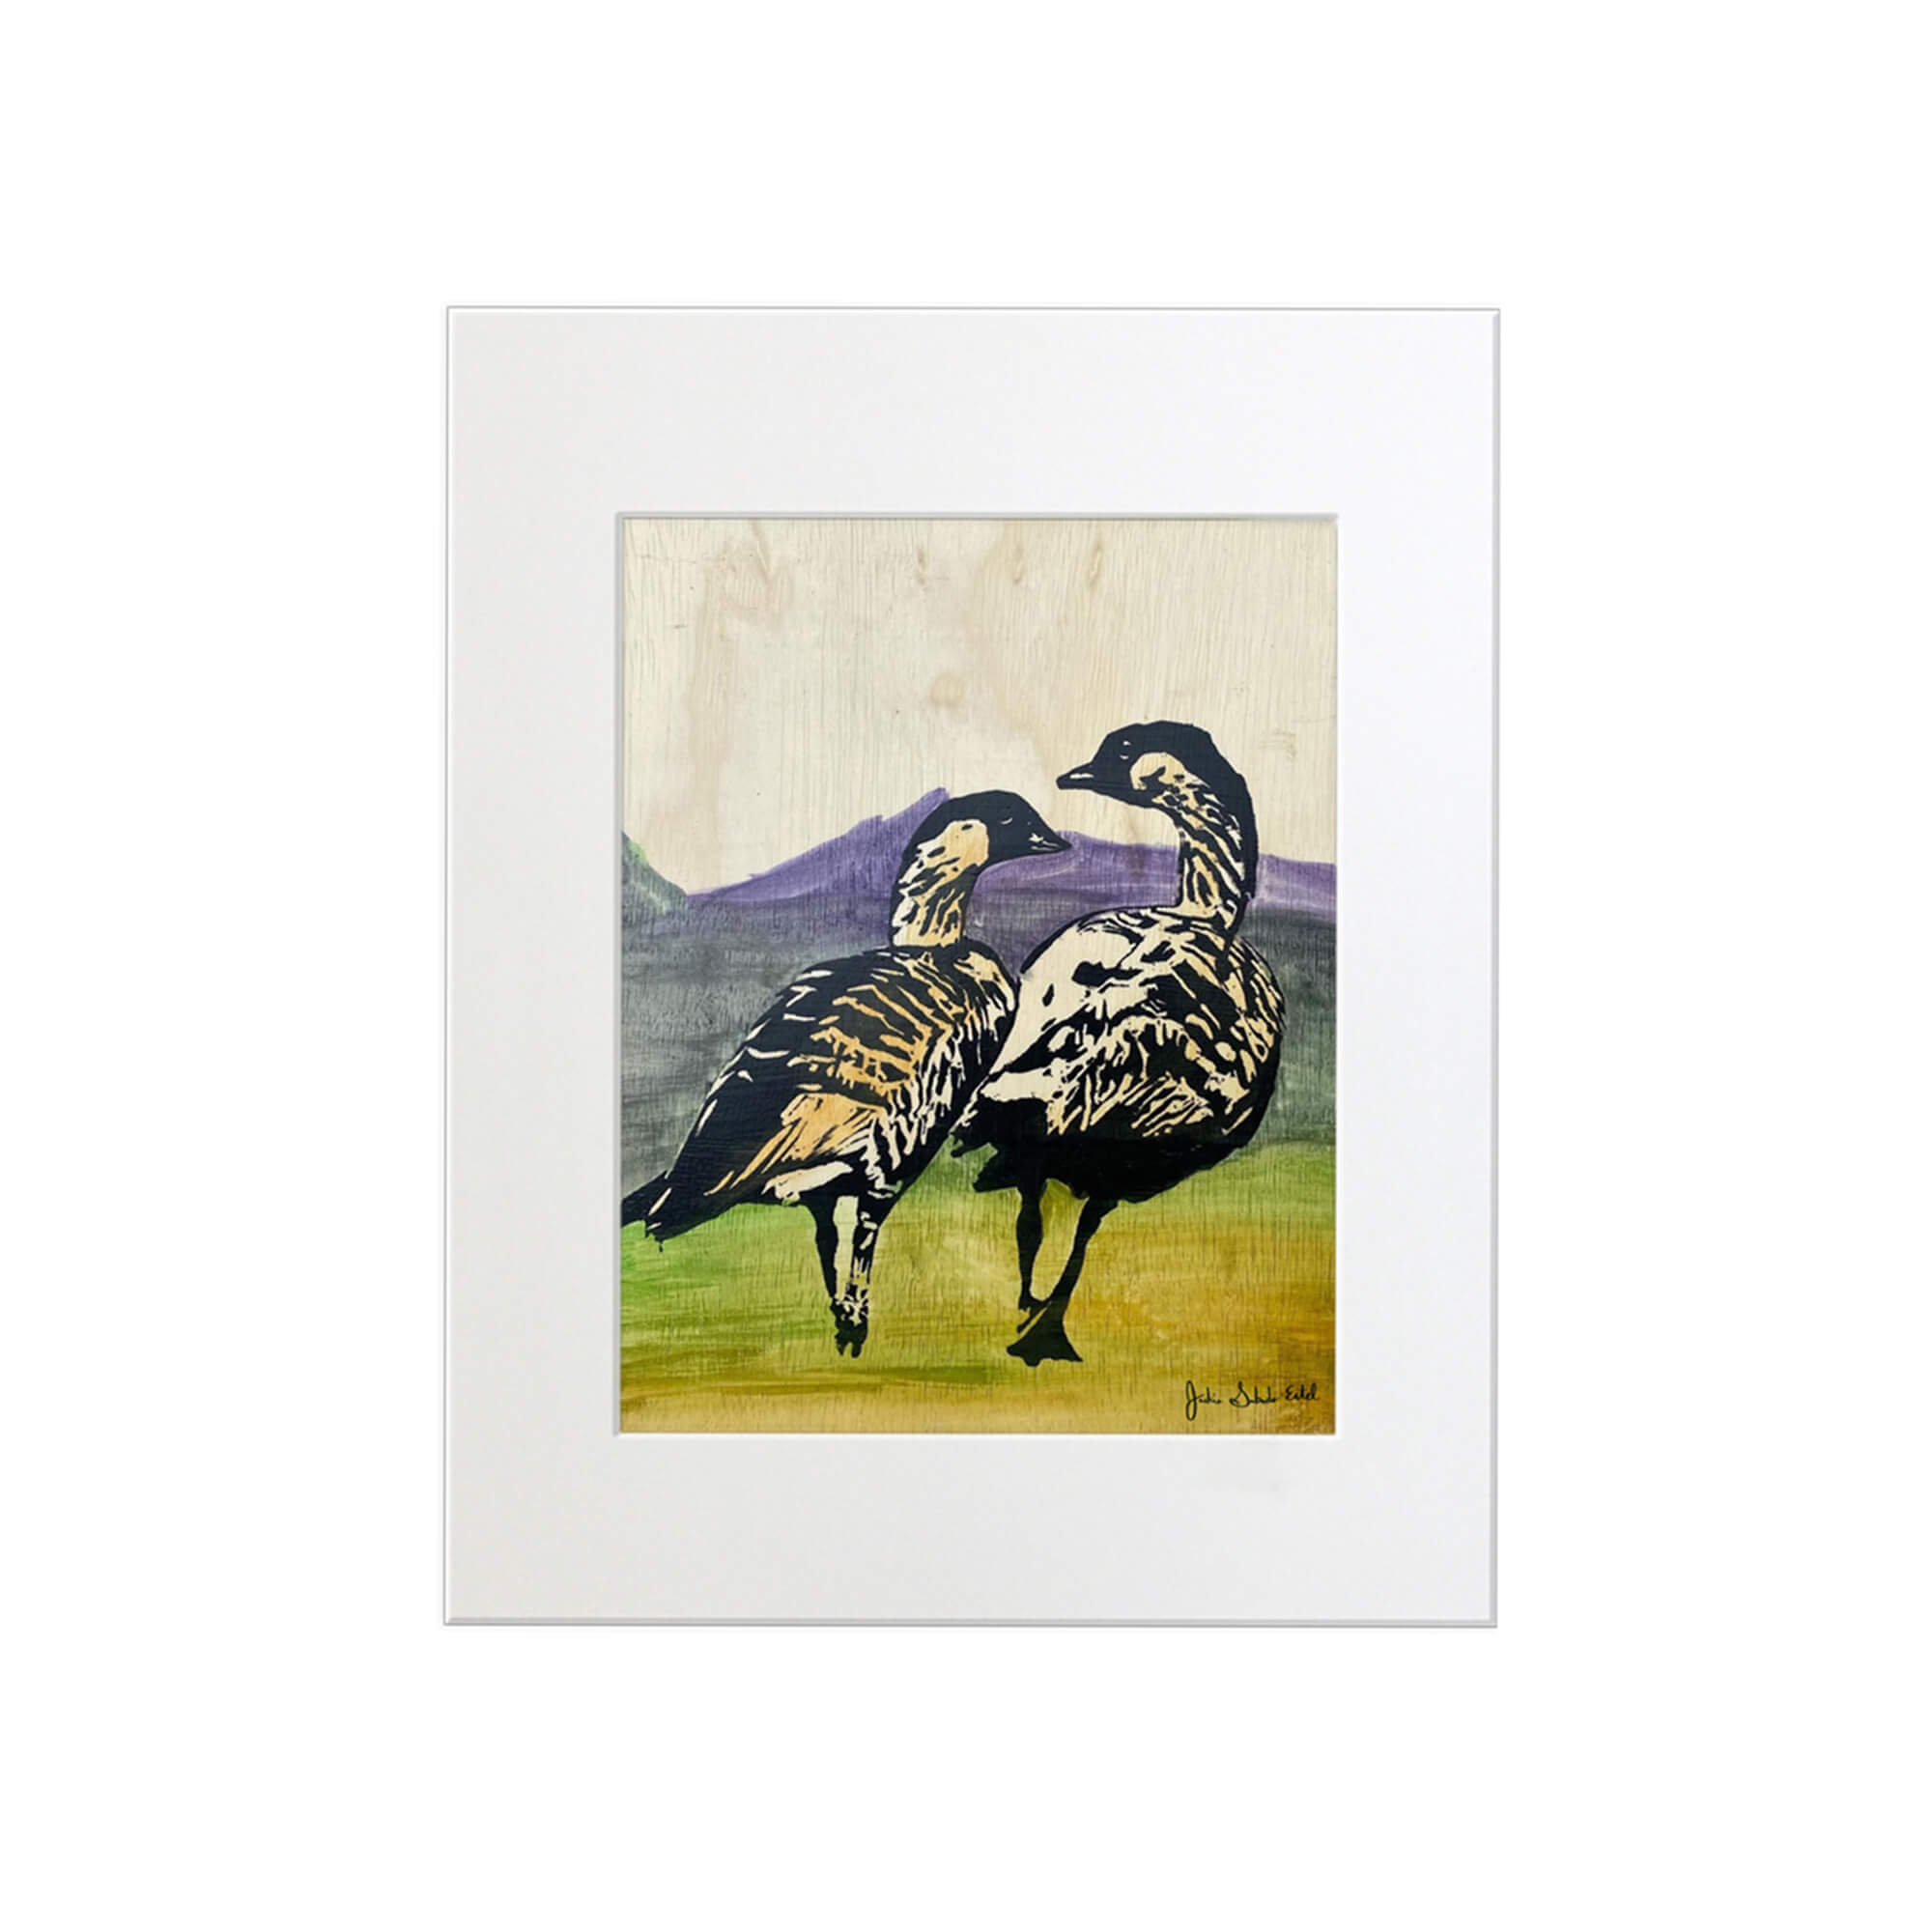 A matted art print featuring two ducks walking while enjoying the colorful landscapes of Hawaii by Hawaii artist Jackie Eitel